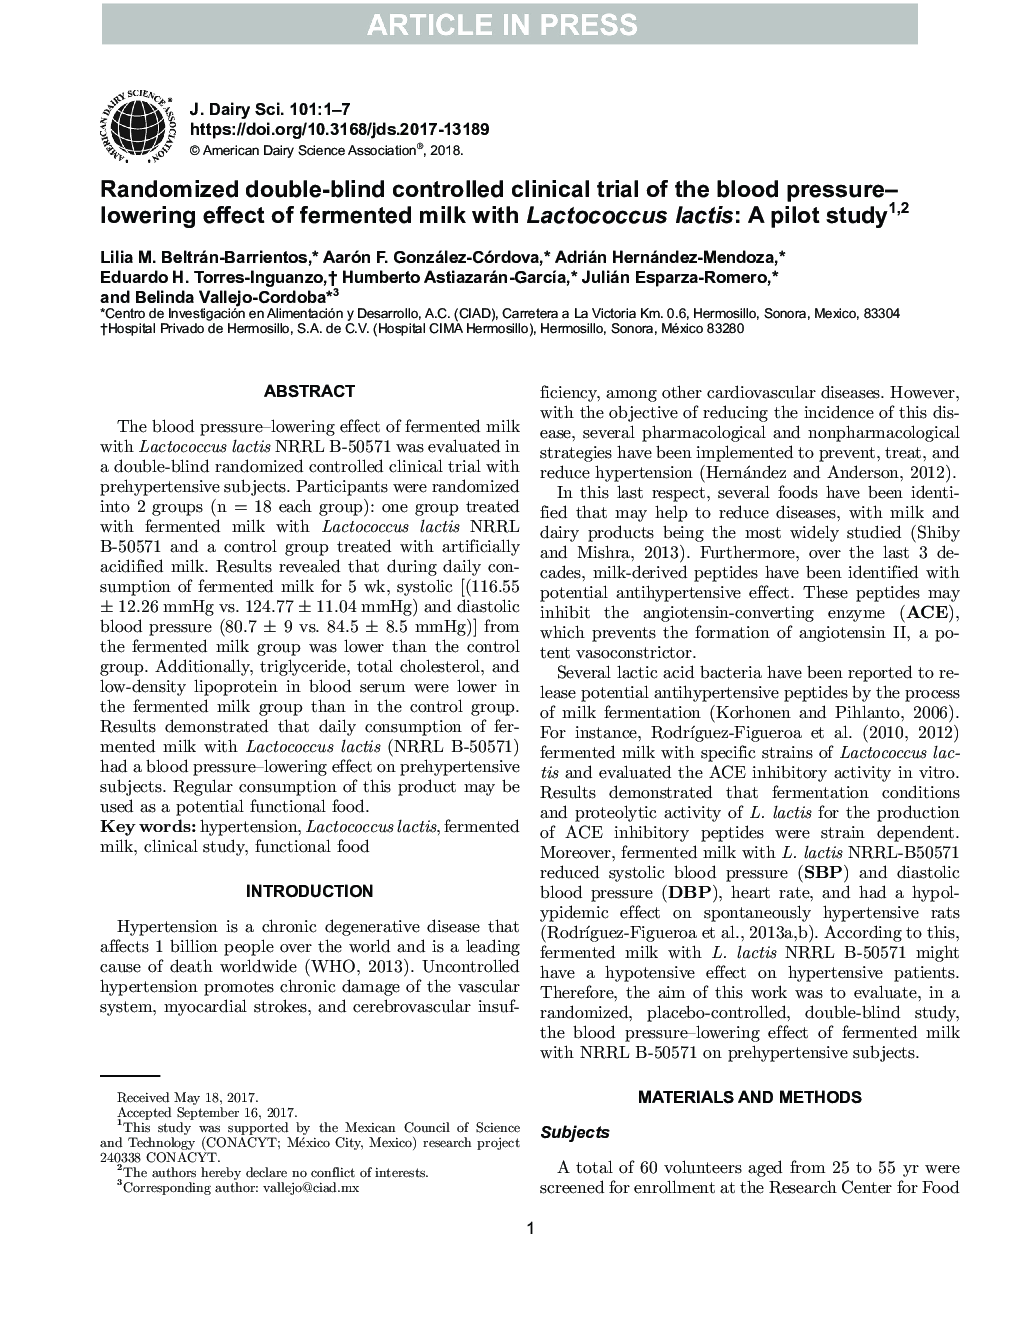 Randomized double-blind controlled clinical trial of the blood pressure-lowering effect of fermented milk with Lactococcus lactis: A pilot study12